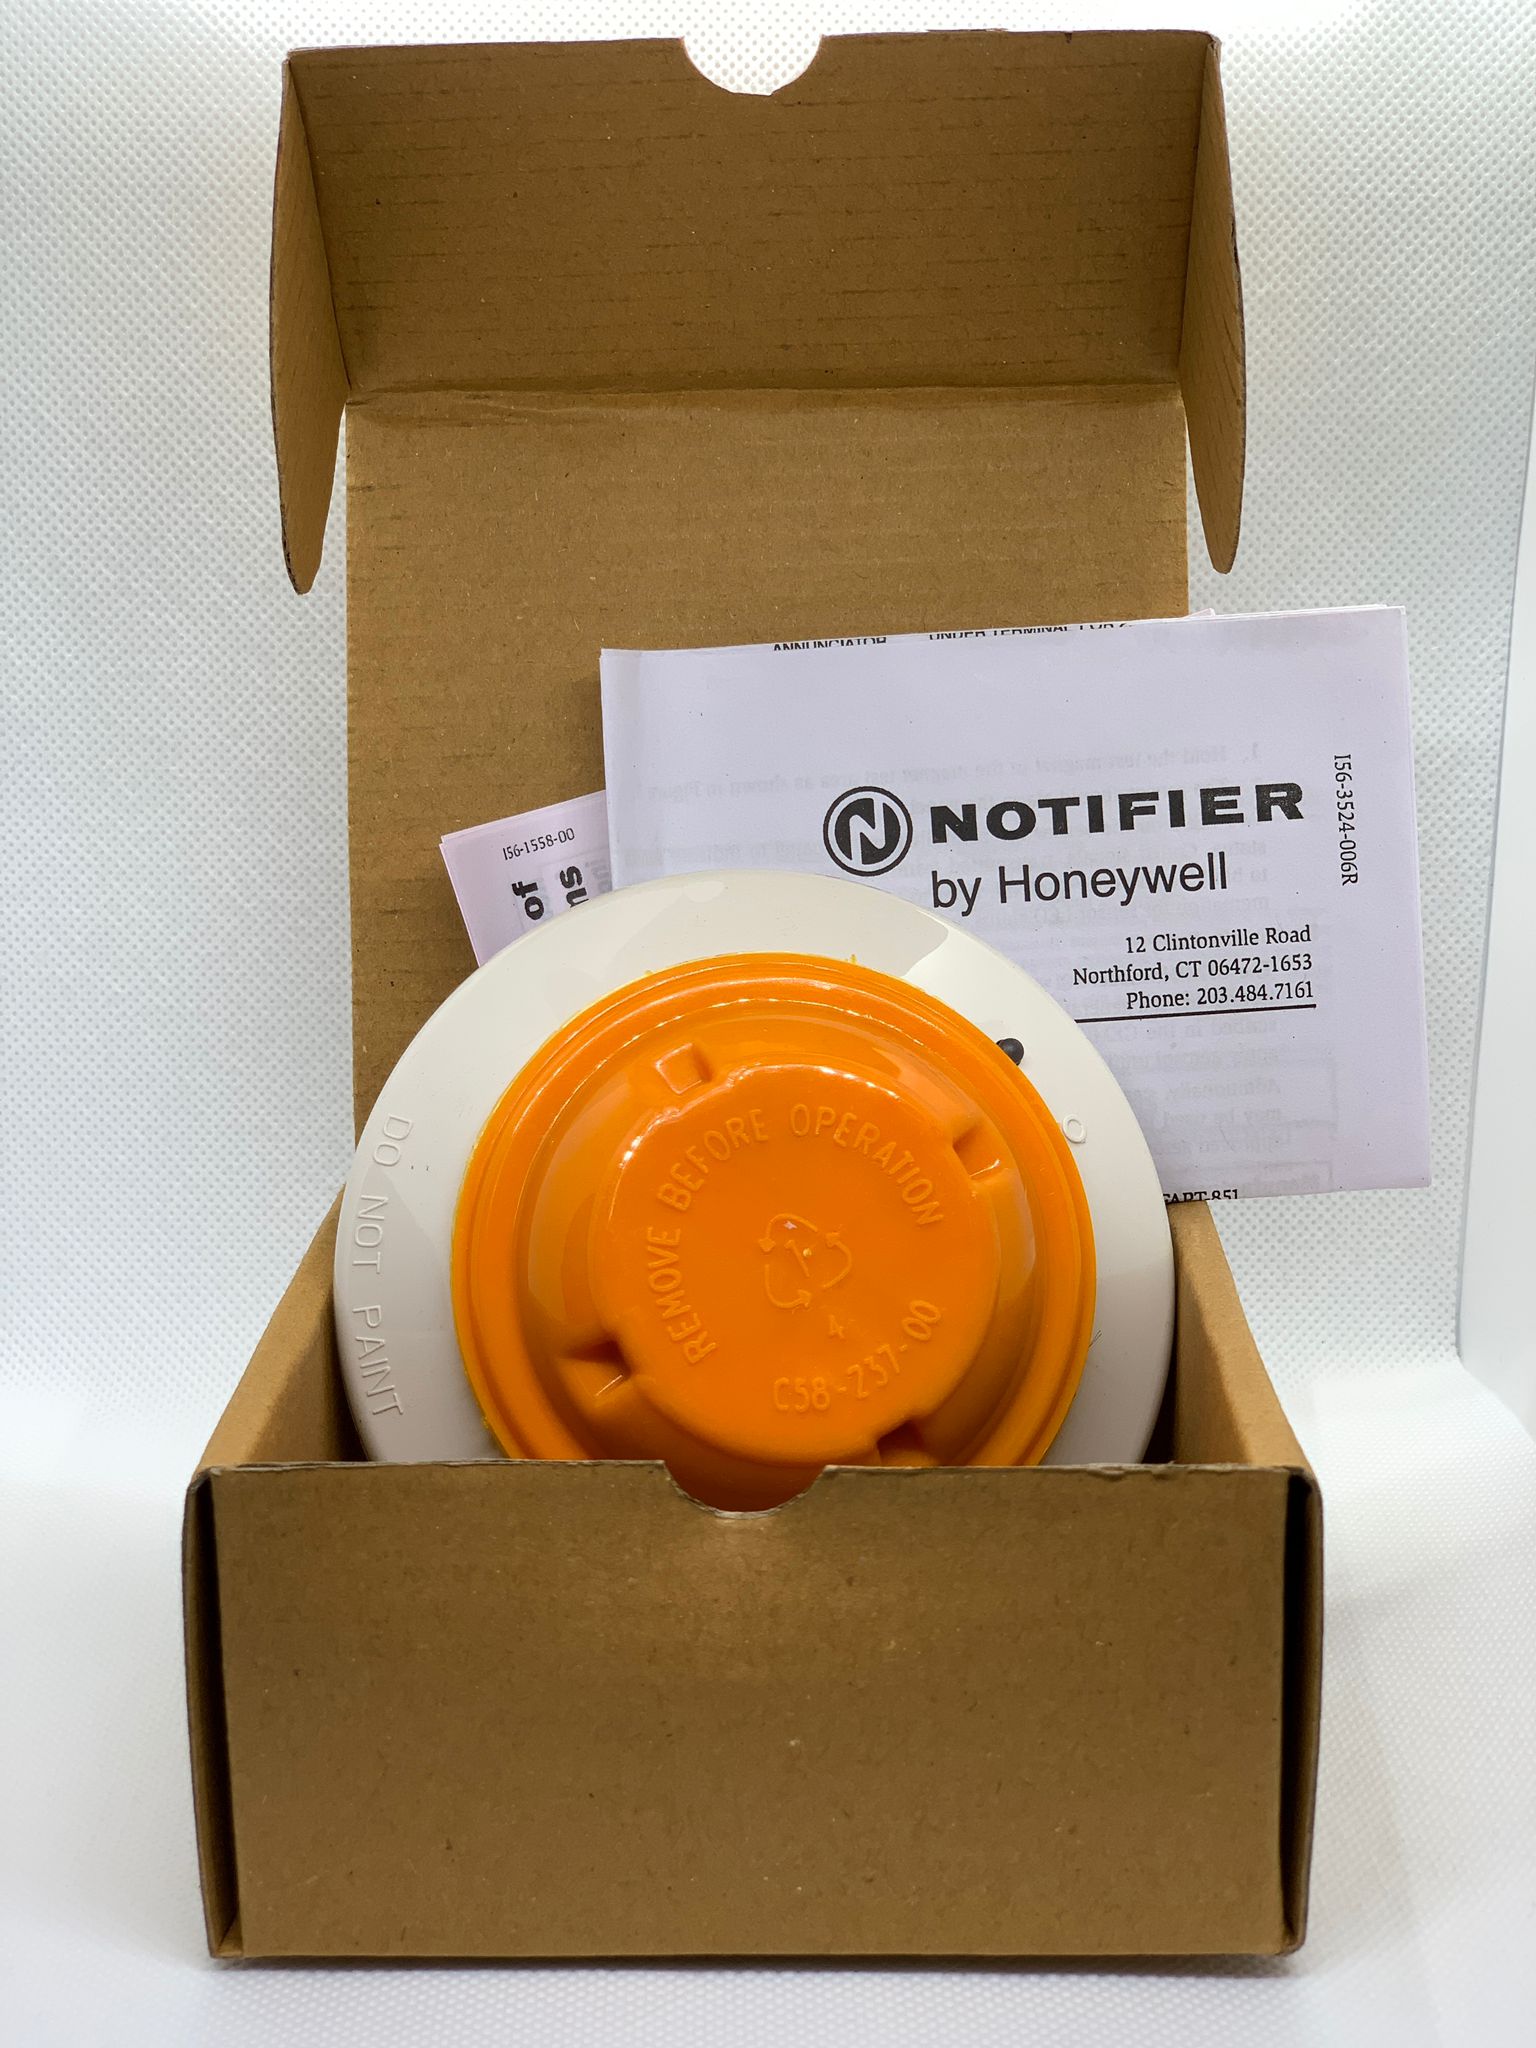 Notifier FSP-851 (Discontinued, Use Direct Replacement FSP-951-IV) - The Fire Alarm Supplier